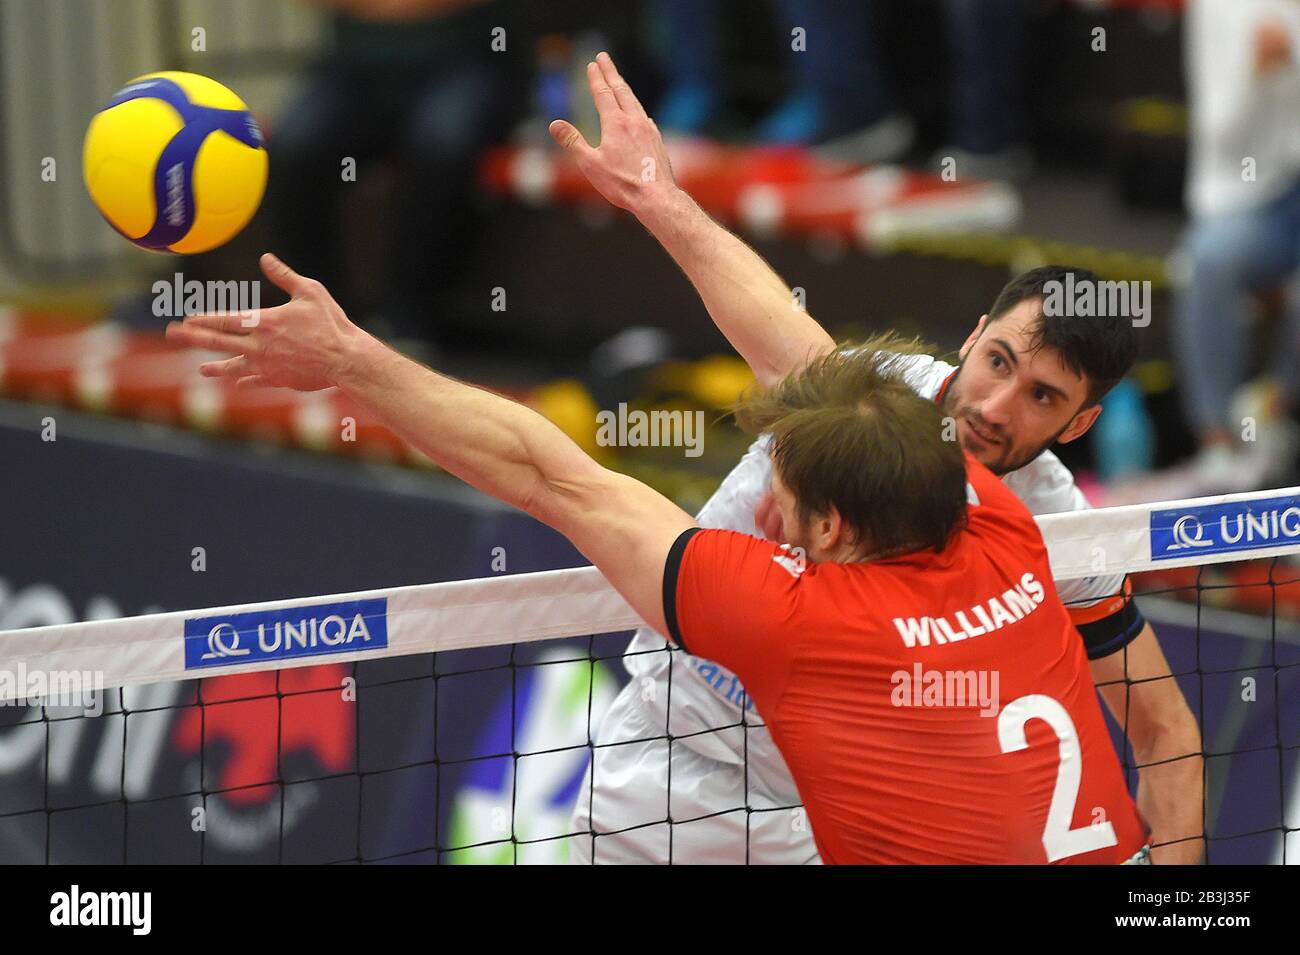 Karlovy Vary, Czech Republic. 04th Mar, 2020. From left LINCOLN WILLIAMS of  Ankara and LUKASZ WIESE of Karlovarsko in action during the men  quarterfinal Volleyball Challenge Cup match VK Karlovarsko (Czech) vs